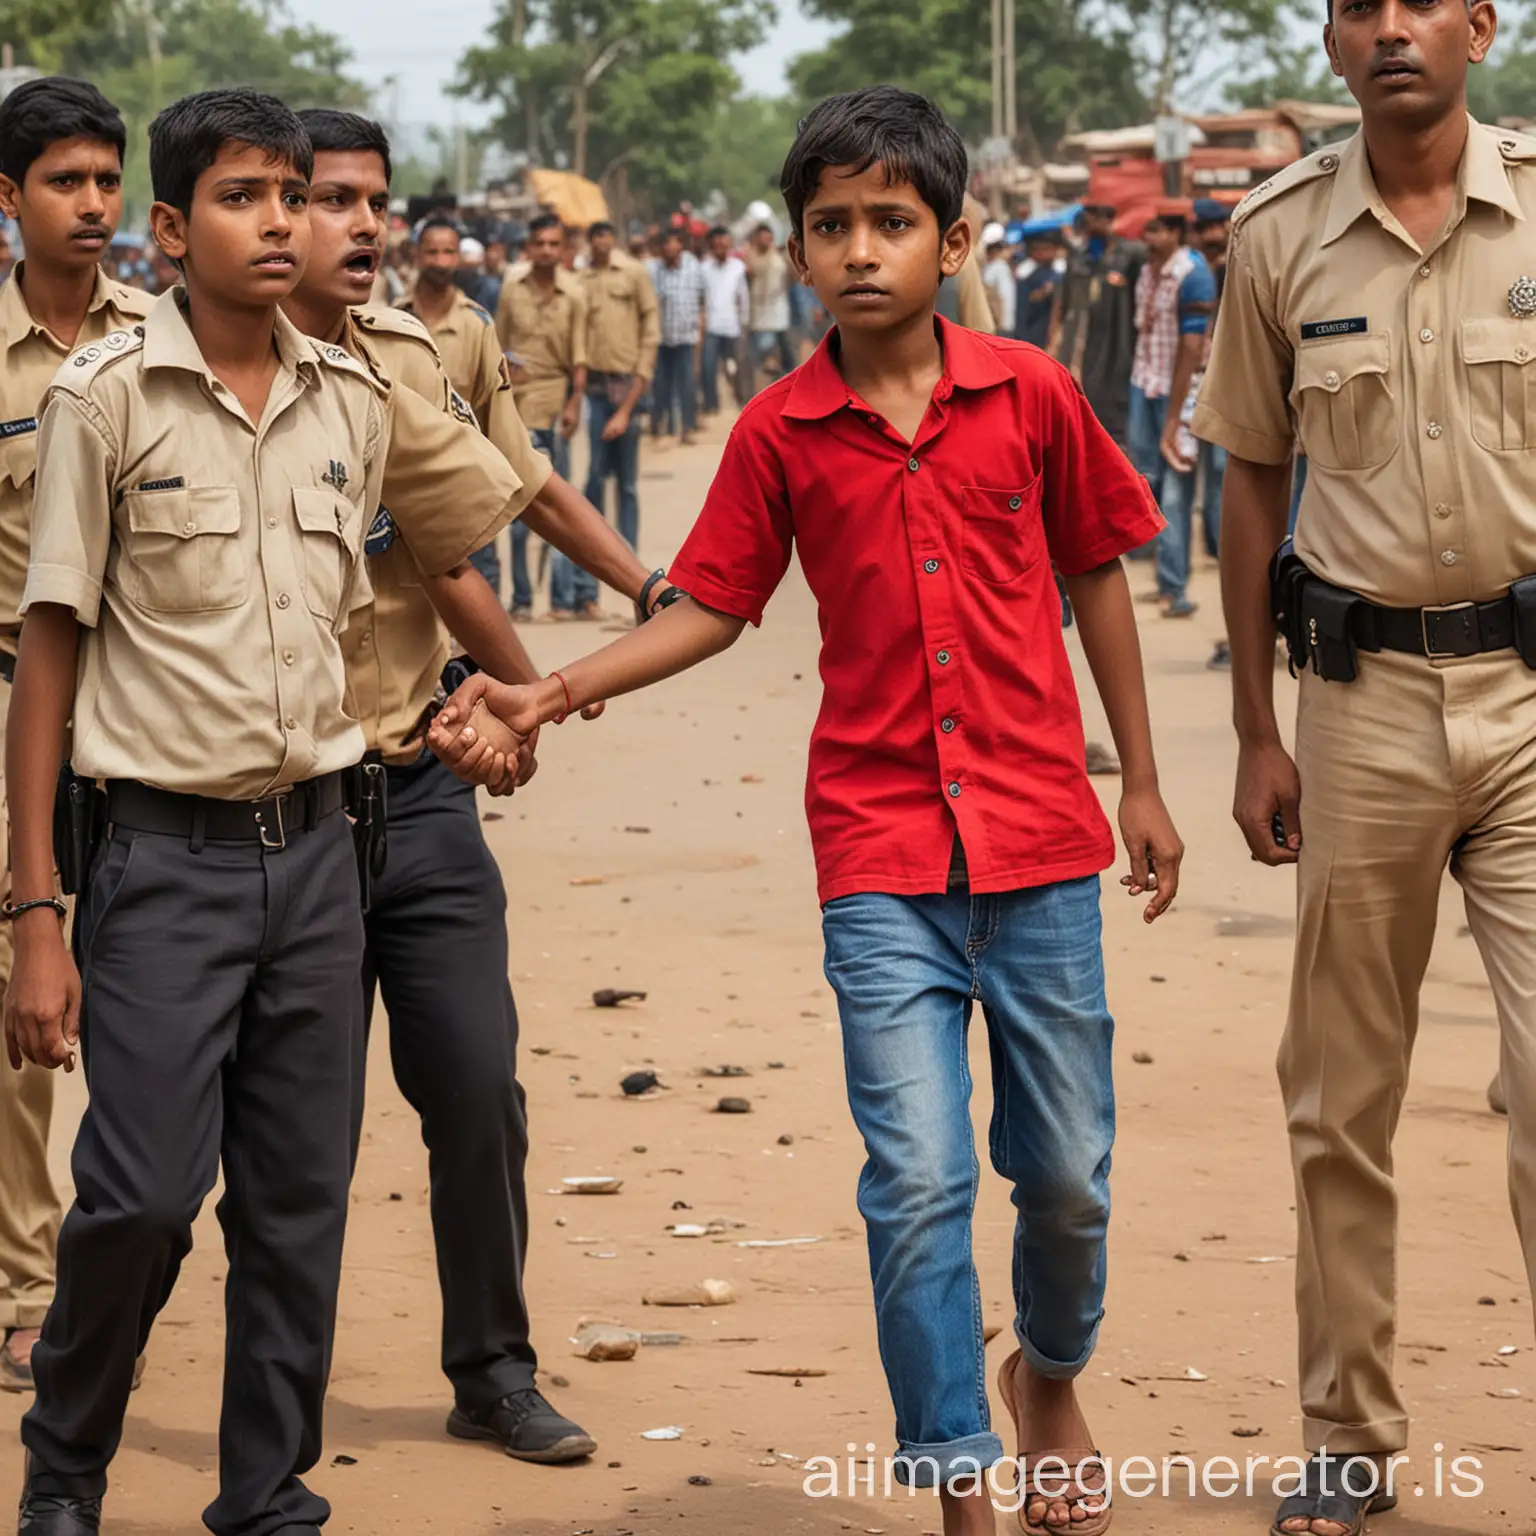 Indian-Kid-Arrested-in-Red-Shirt